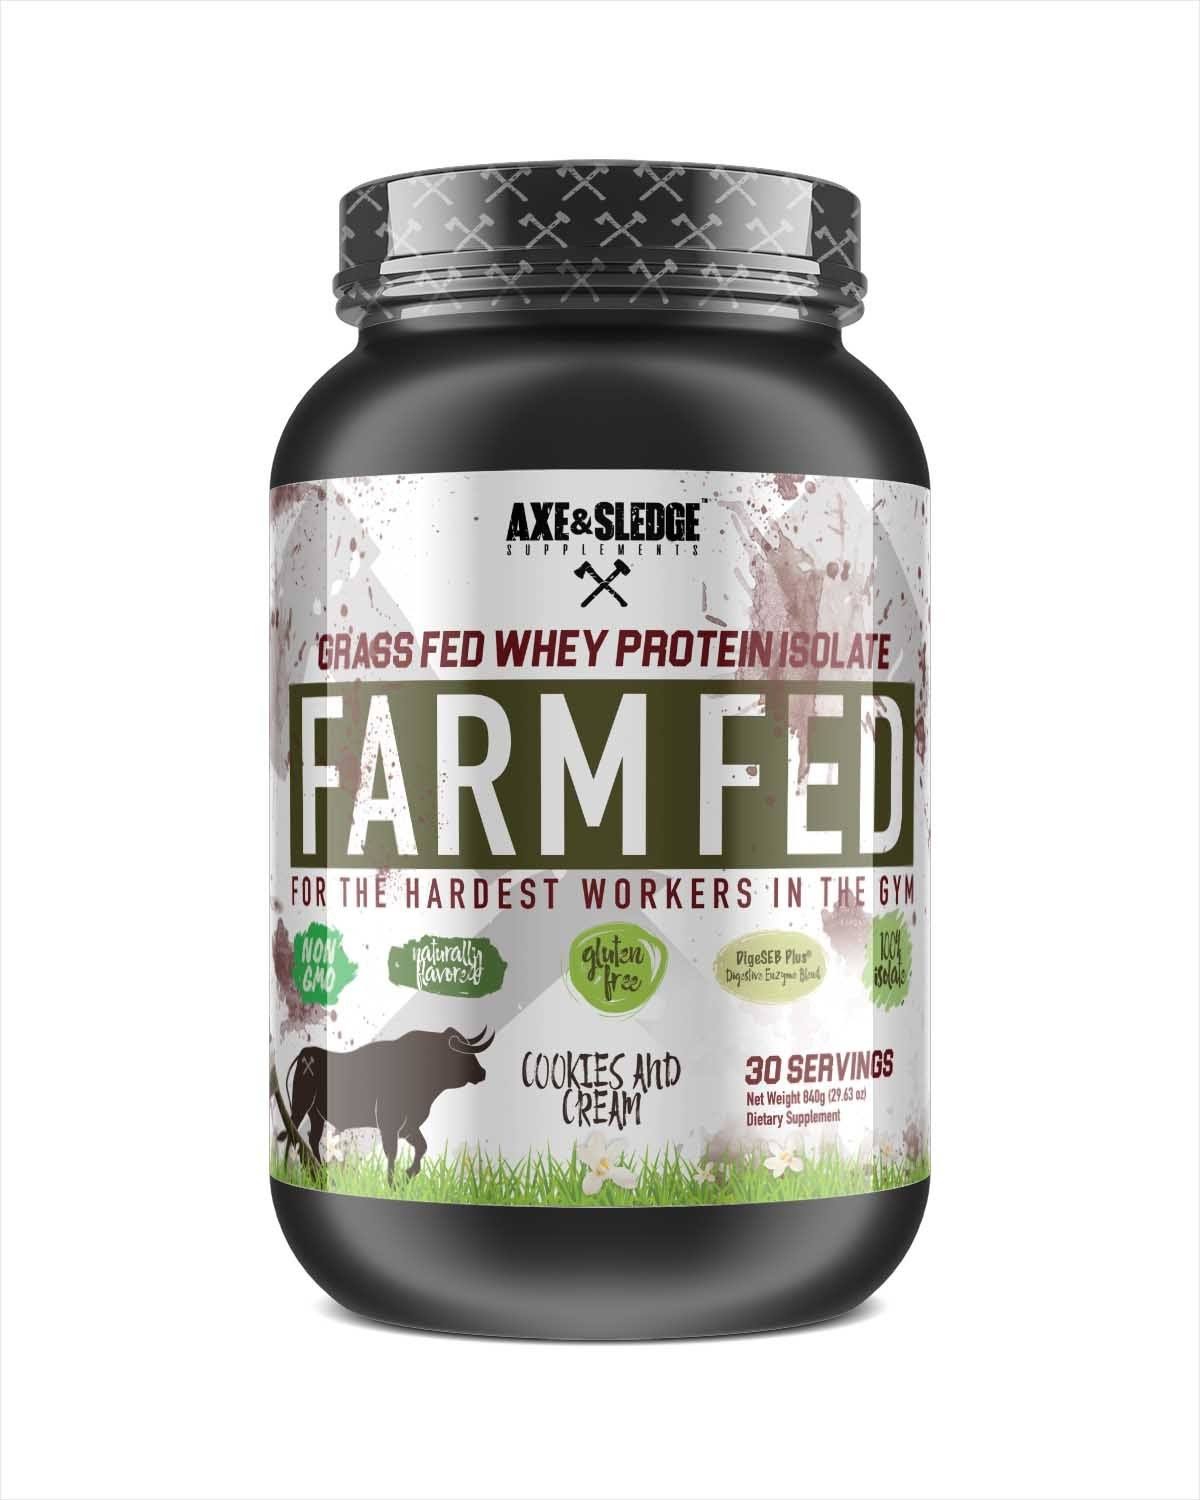 Axe & Sledge Farm Fed Grass Fed Whey Protein Isolate Cookies & Cream 30 Servings (840 g)